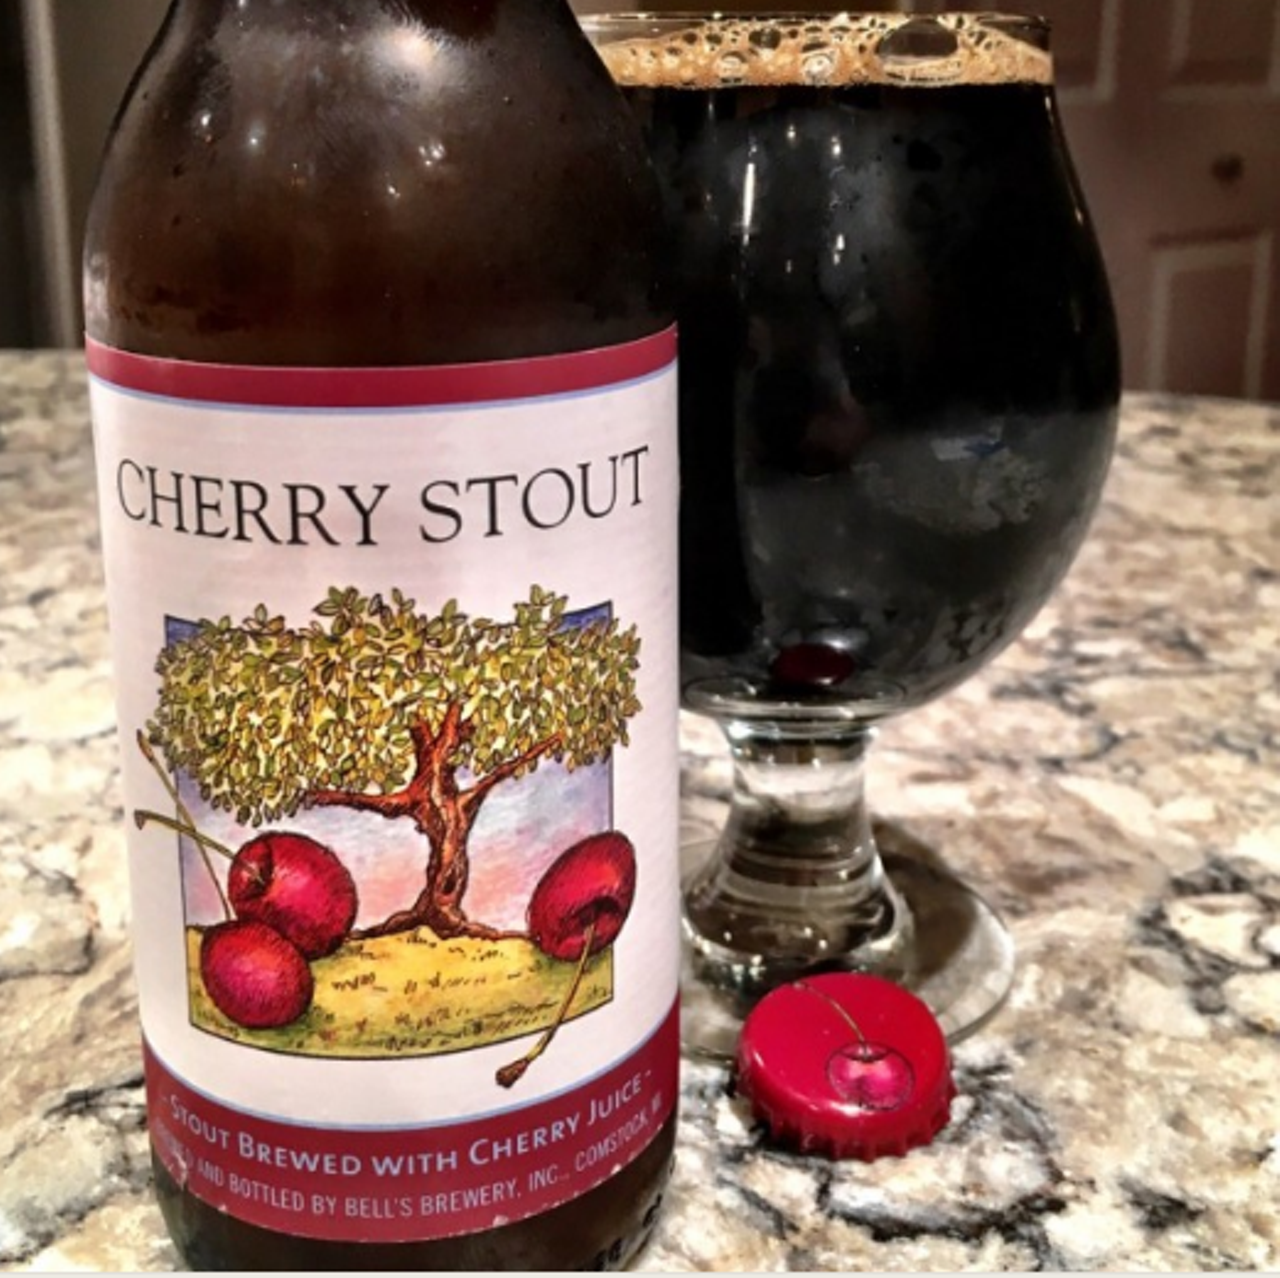 Bell&#146;s Cherry Stout
Style: Stout
ABV: 7.0%
Bell&#146;s uses cherries that are grown in Traverse City so this beer is 100% Michigan-made.